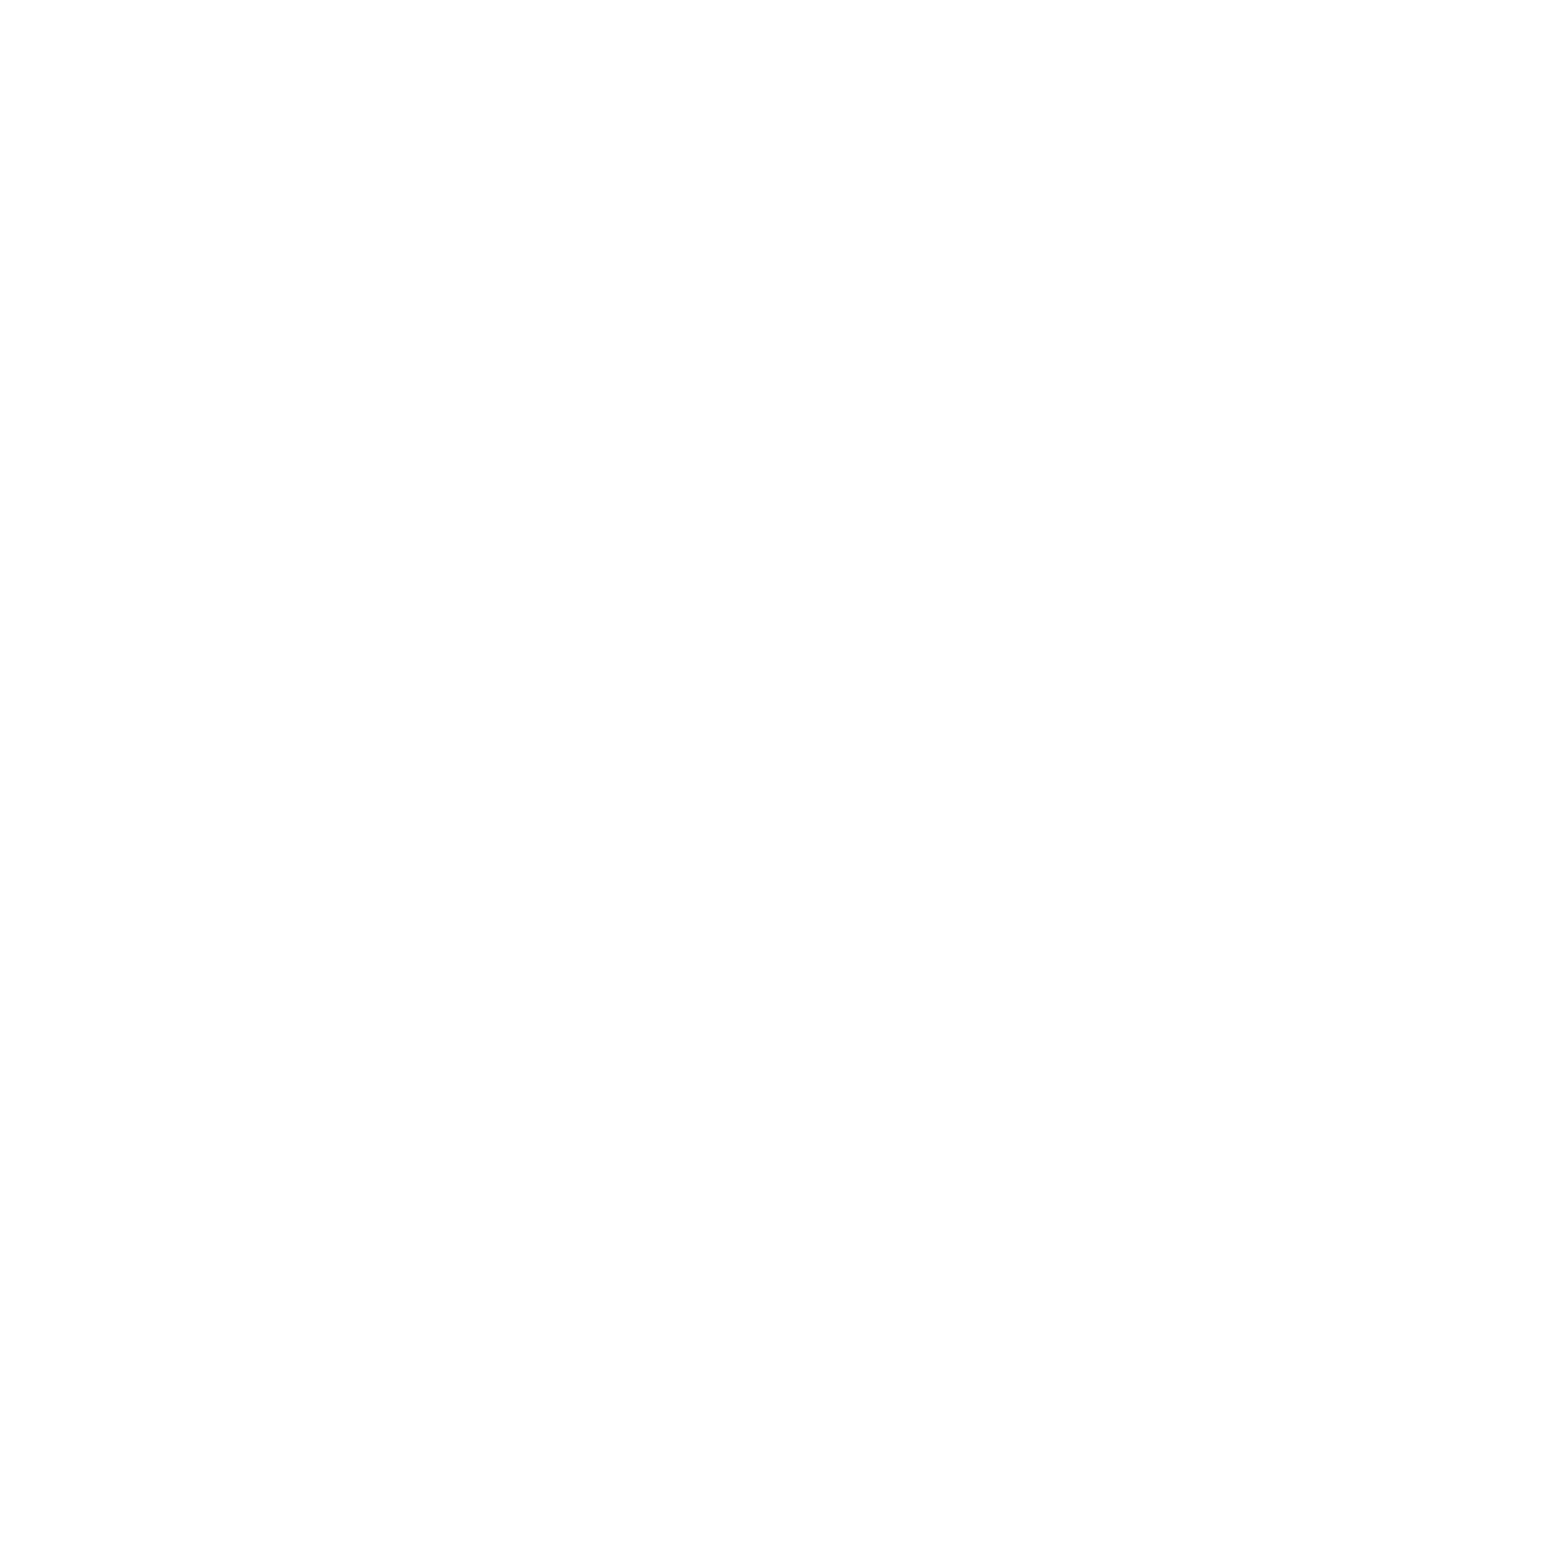 CKM Productions